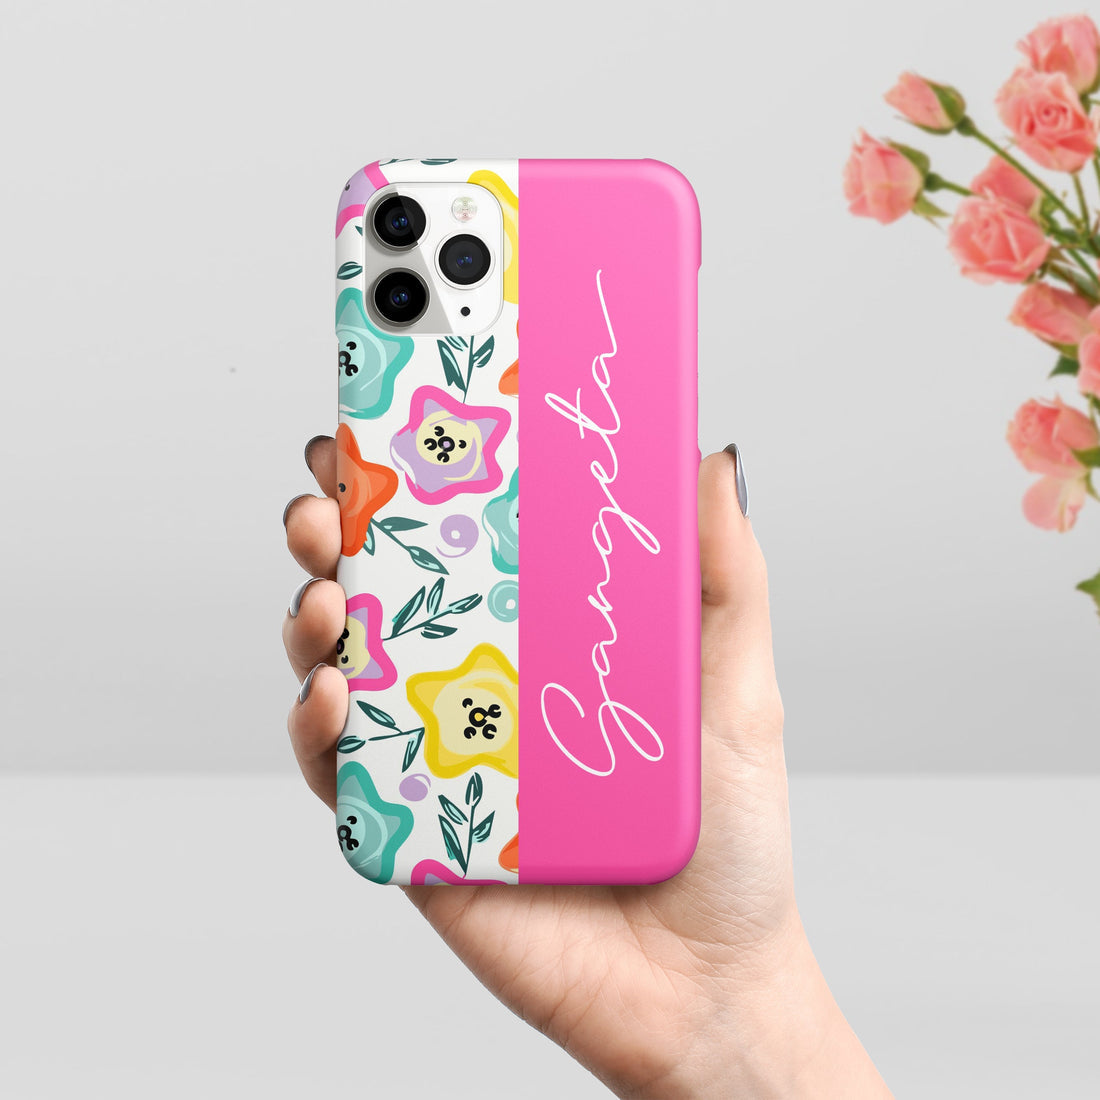 Star Floral Cases to Match Your Personal Style For Samsung